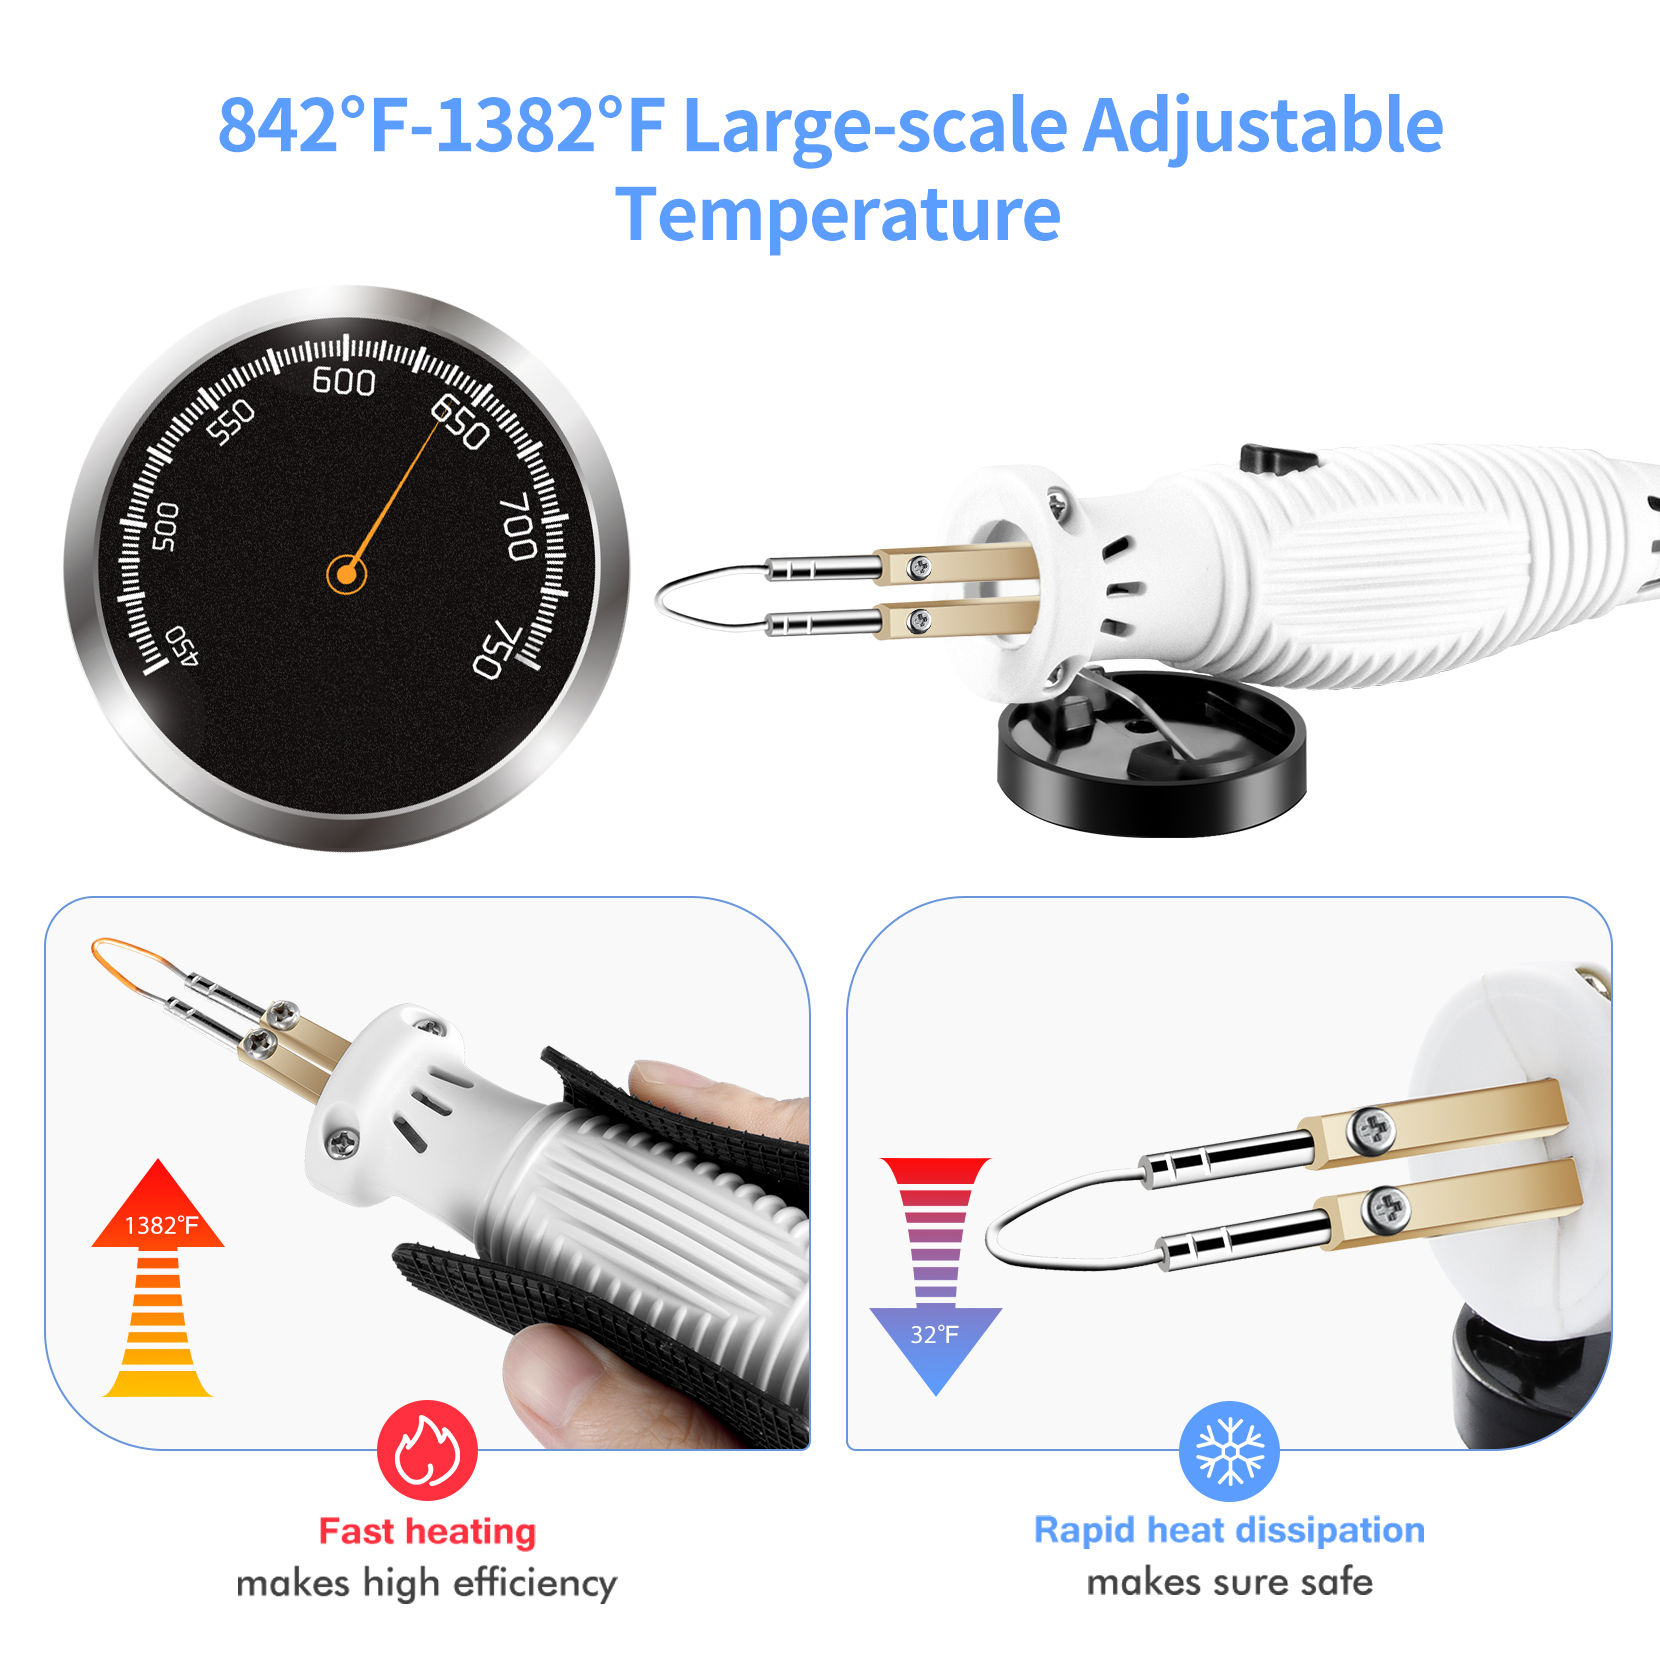 Adjustable Temperature Stand Wire Tips Replacement Screws for Wood/Leather/Gourd Soldering Station Machine with Fast Heat up Woodburner Pen Holife Wood Burning Kit